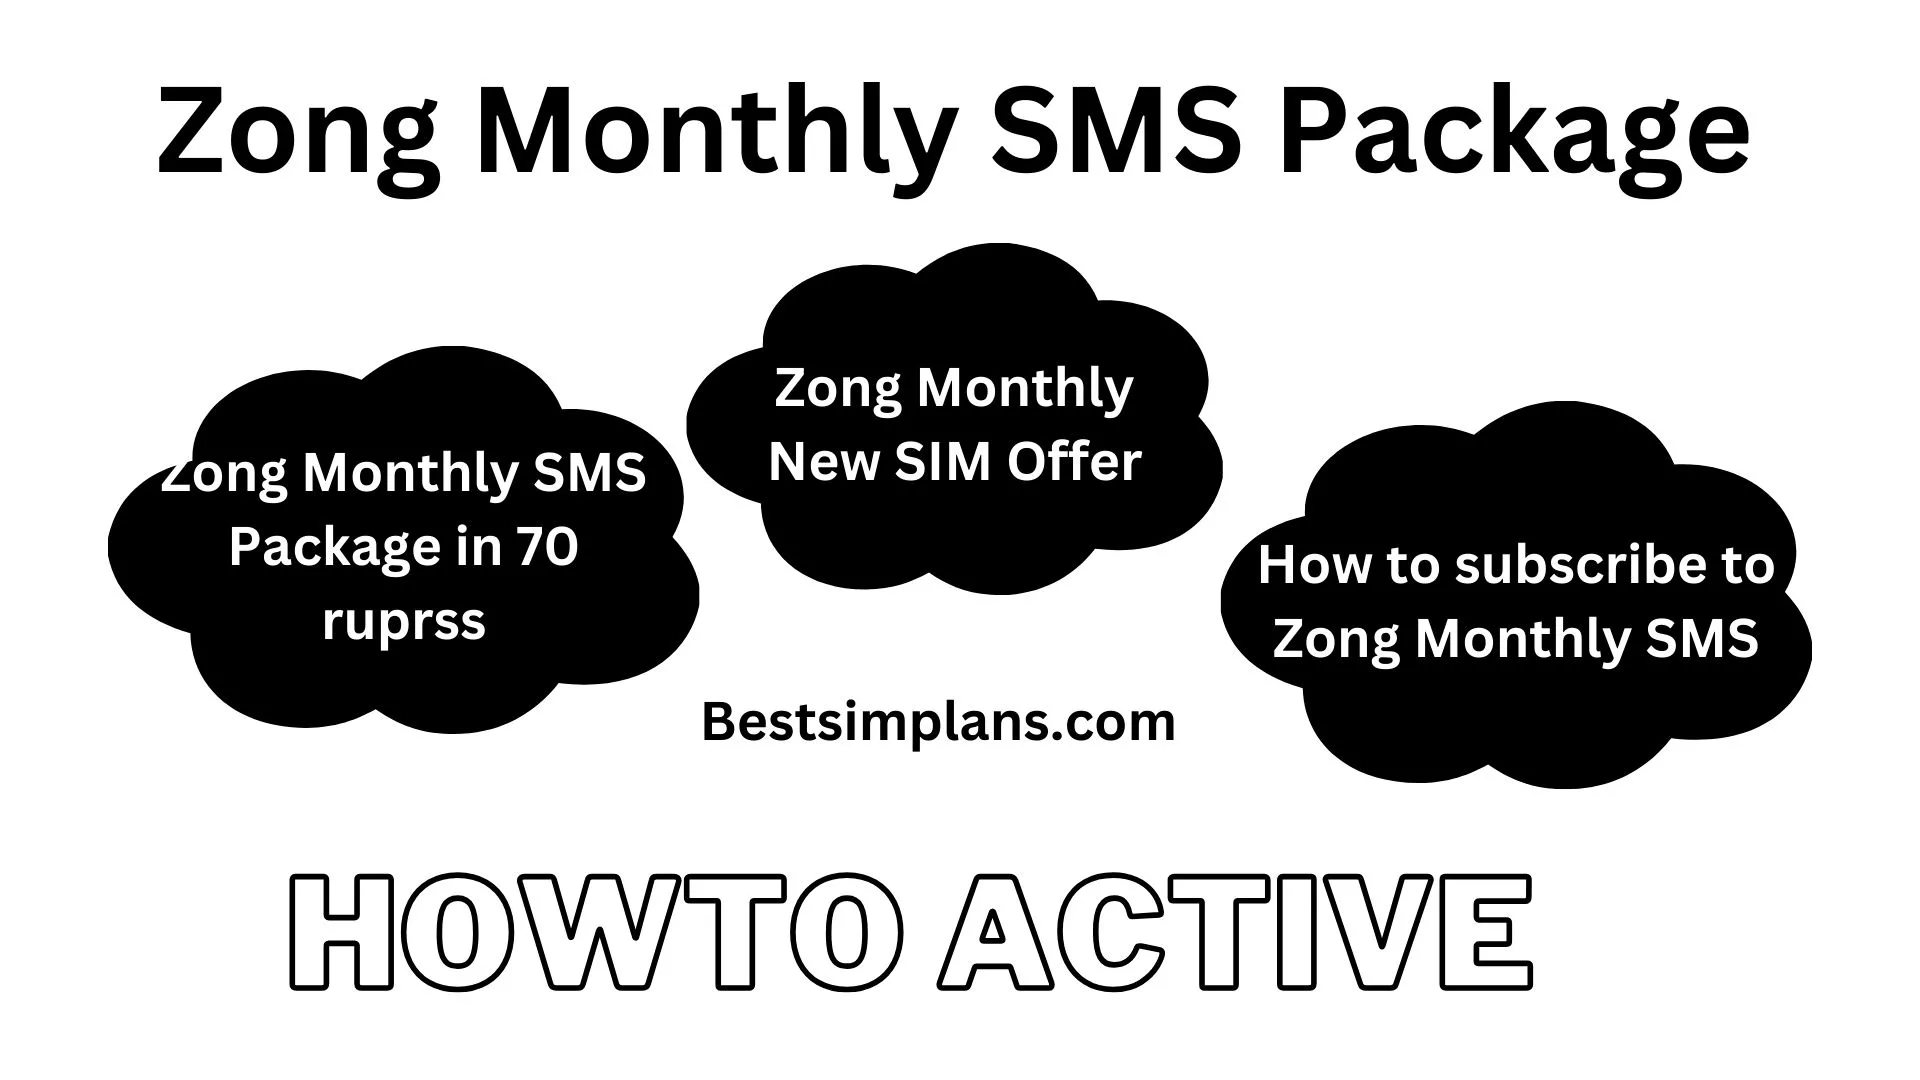 Zong Monthly SMS Package